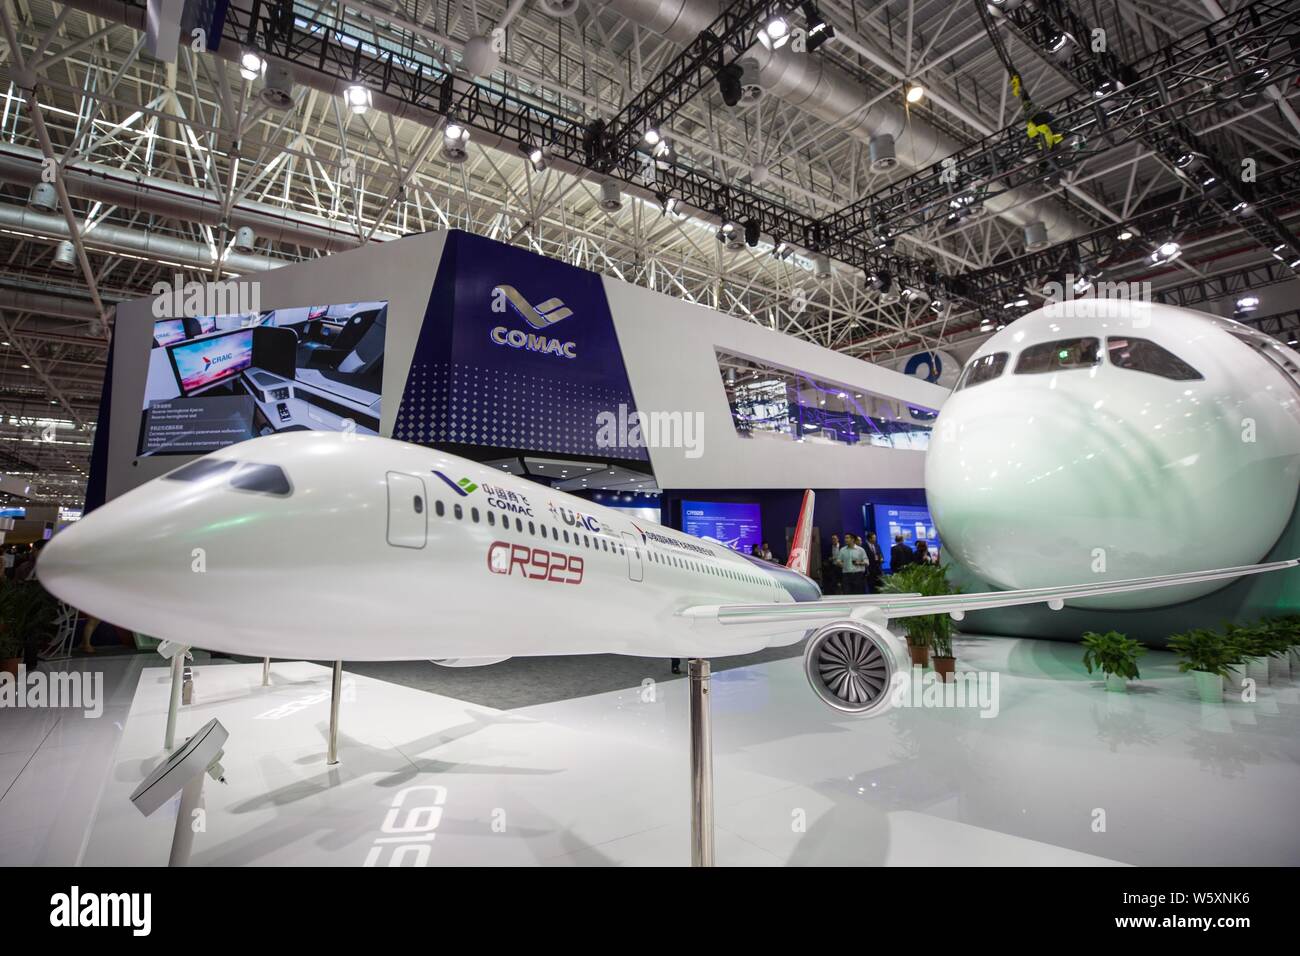 A model of the CR929 widebody passenger jet displayed by Sino-Russian joint venture CRAIC and jointly developed by Russia's United Aircraft Corporatio Stock Photo